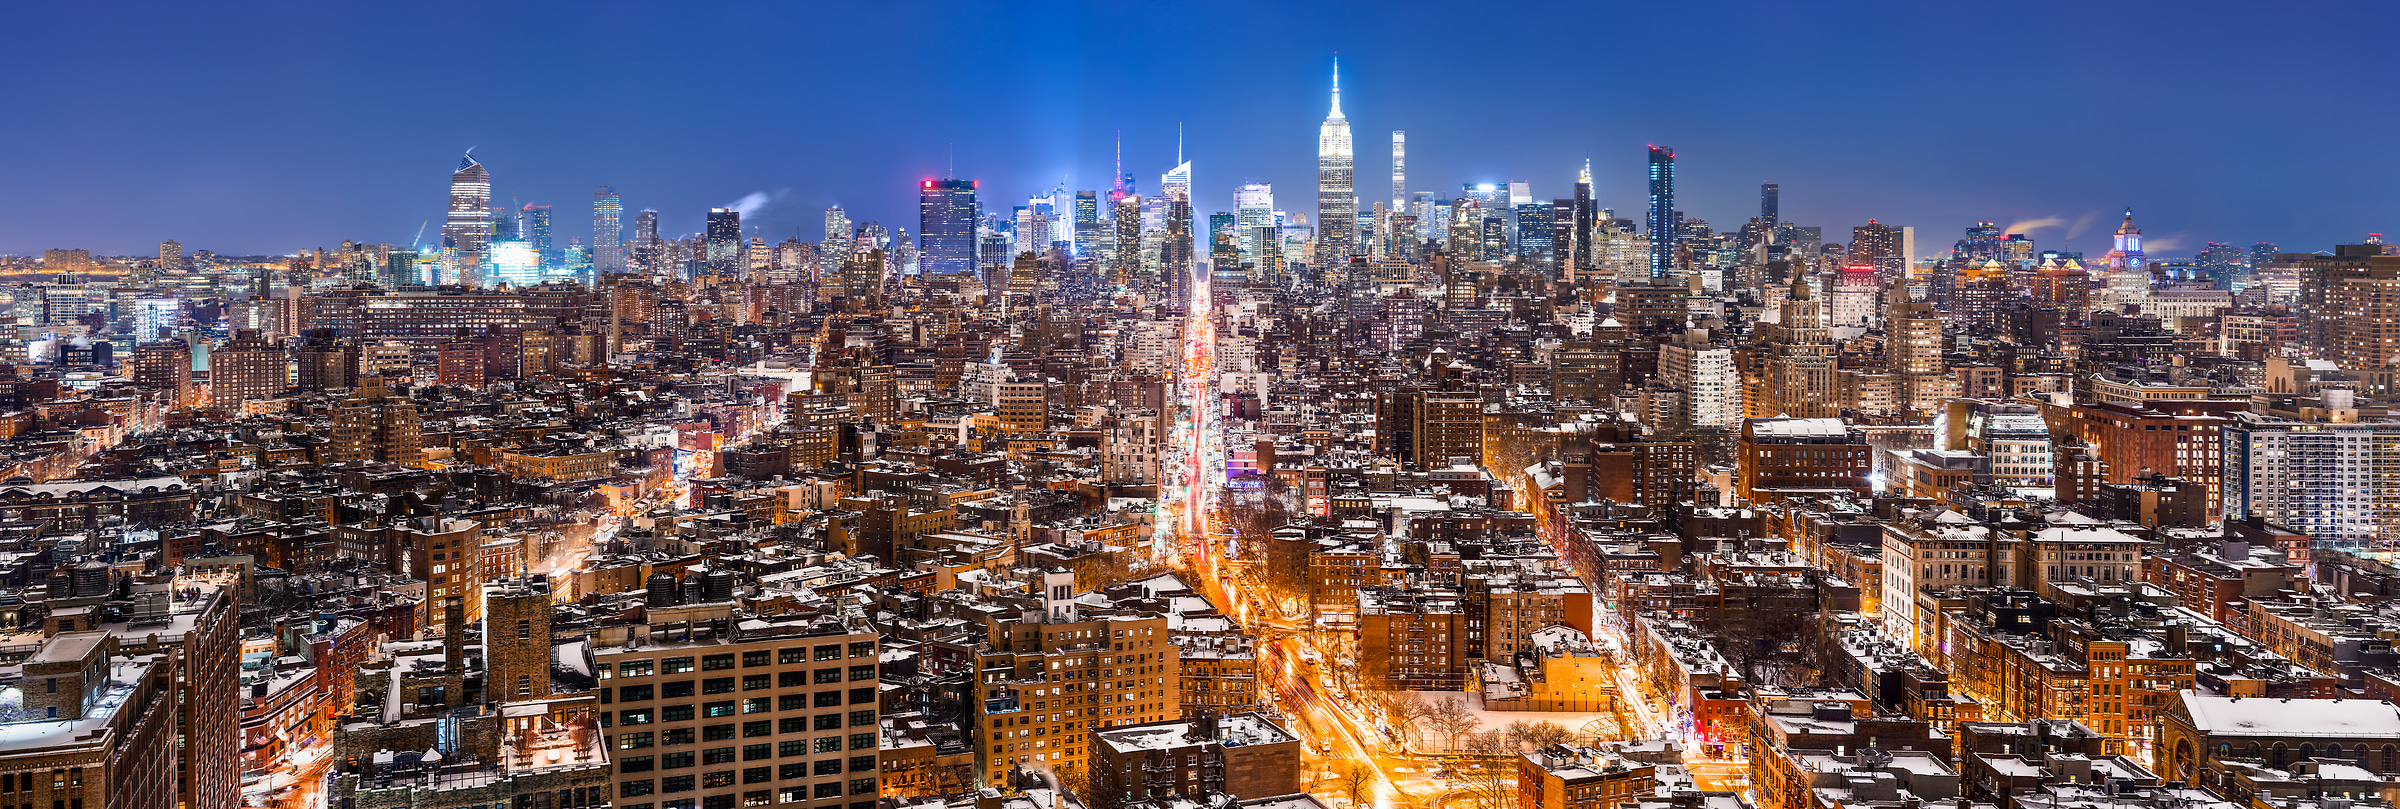 A very high resolution, large-format VAST photo print of the NYC skyline in winter snow at night; cityscape fine art photo created by Dan Piech in New York City